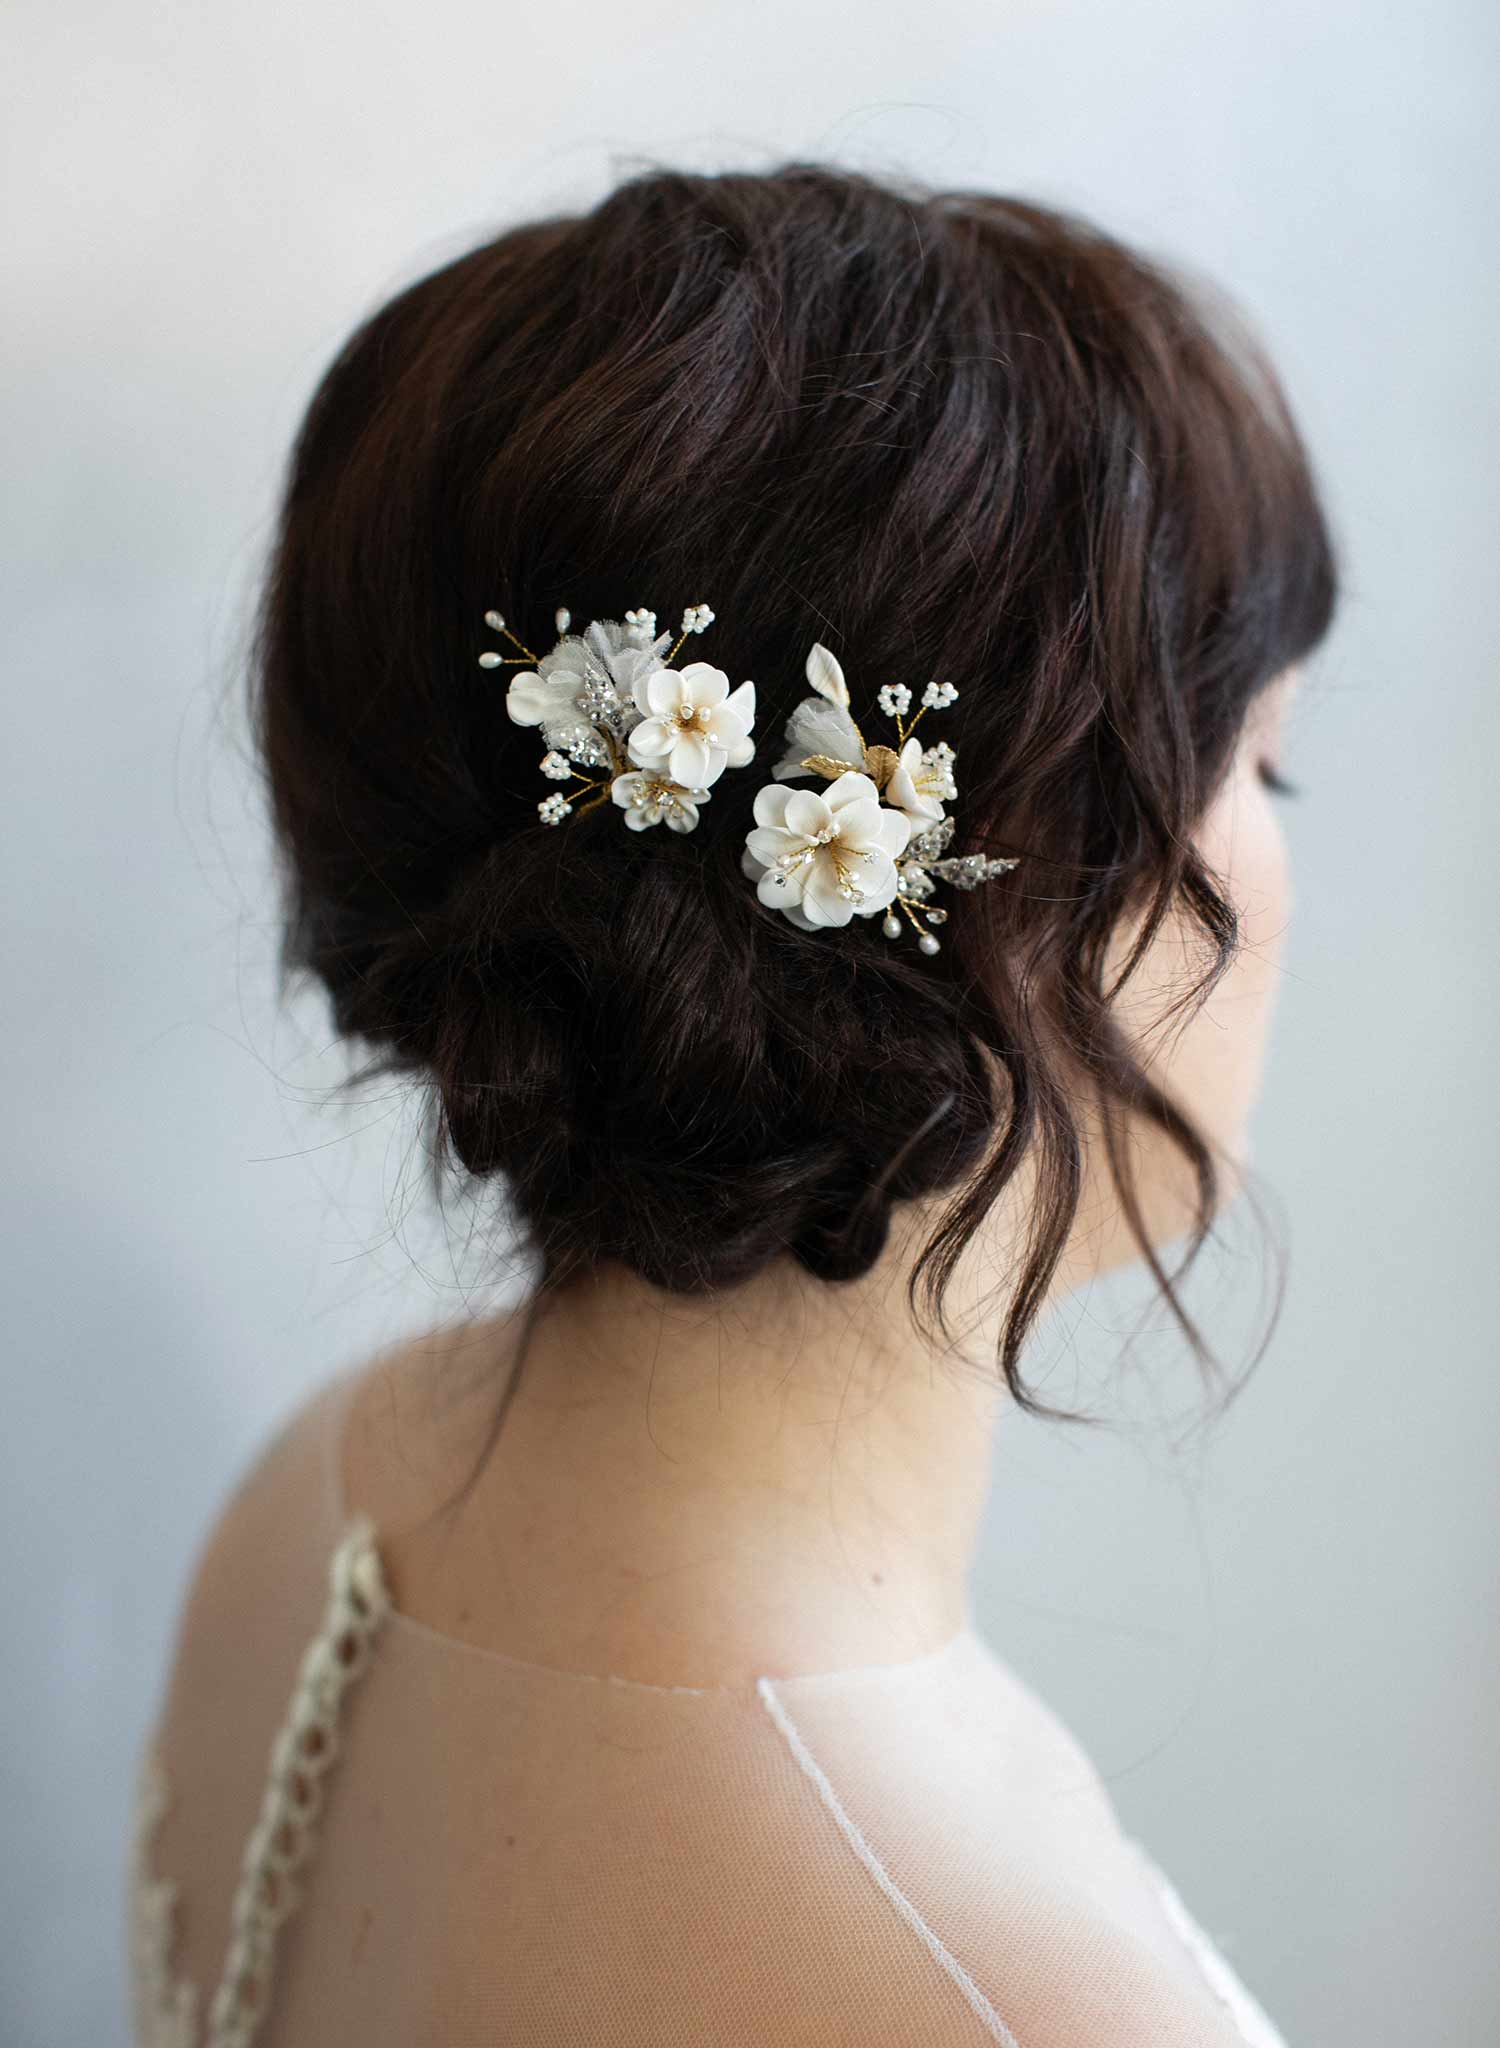 Creamy blossom hair pin set of 2 - Style #925